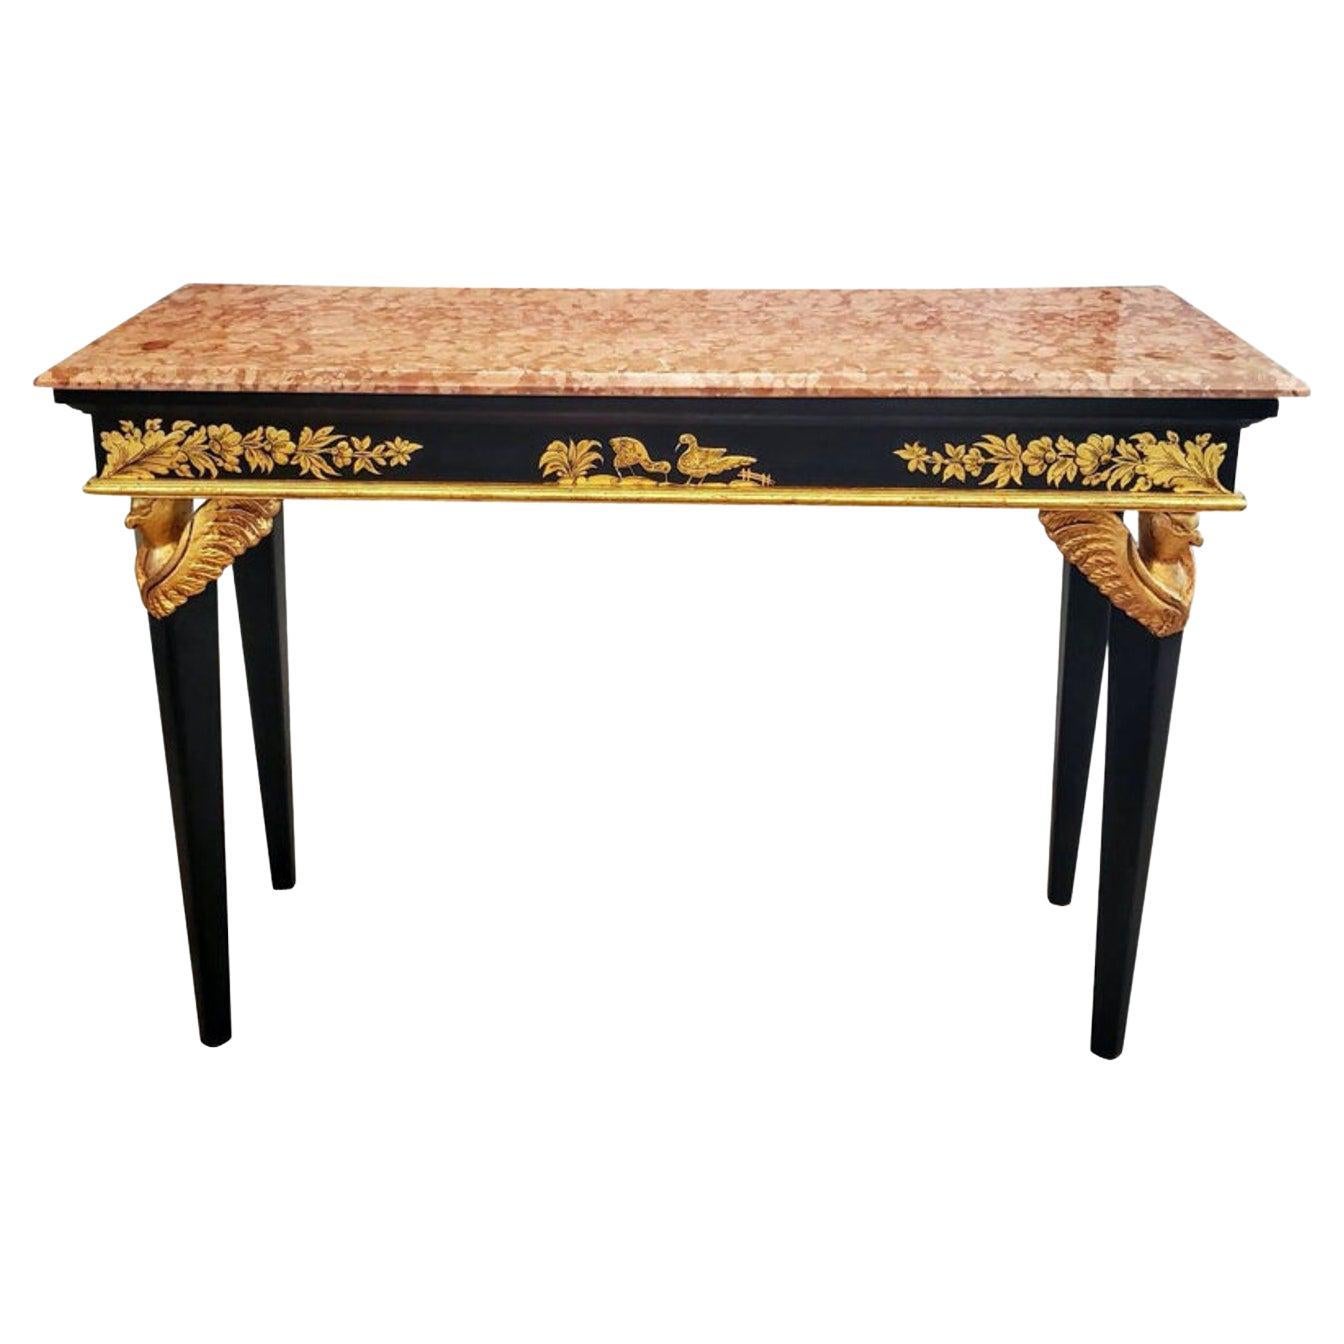 Vintage Italian Neoclassical Rococo Marble Top Console Table For Sale